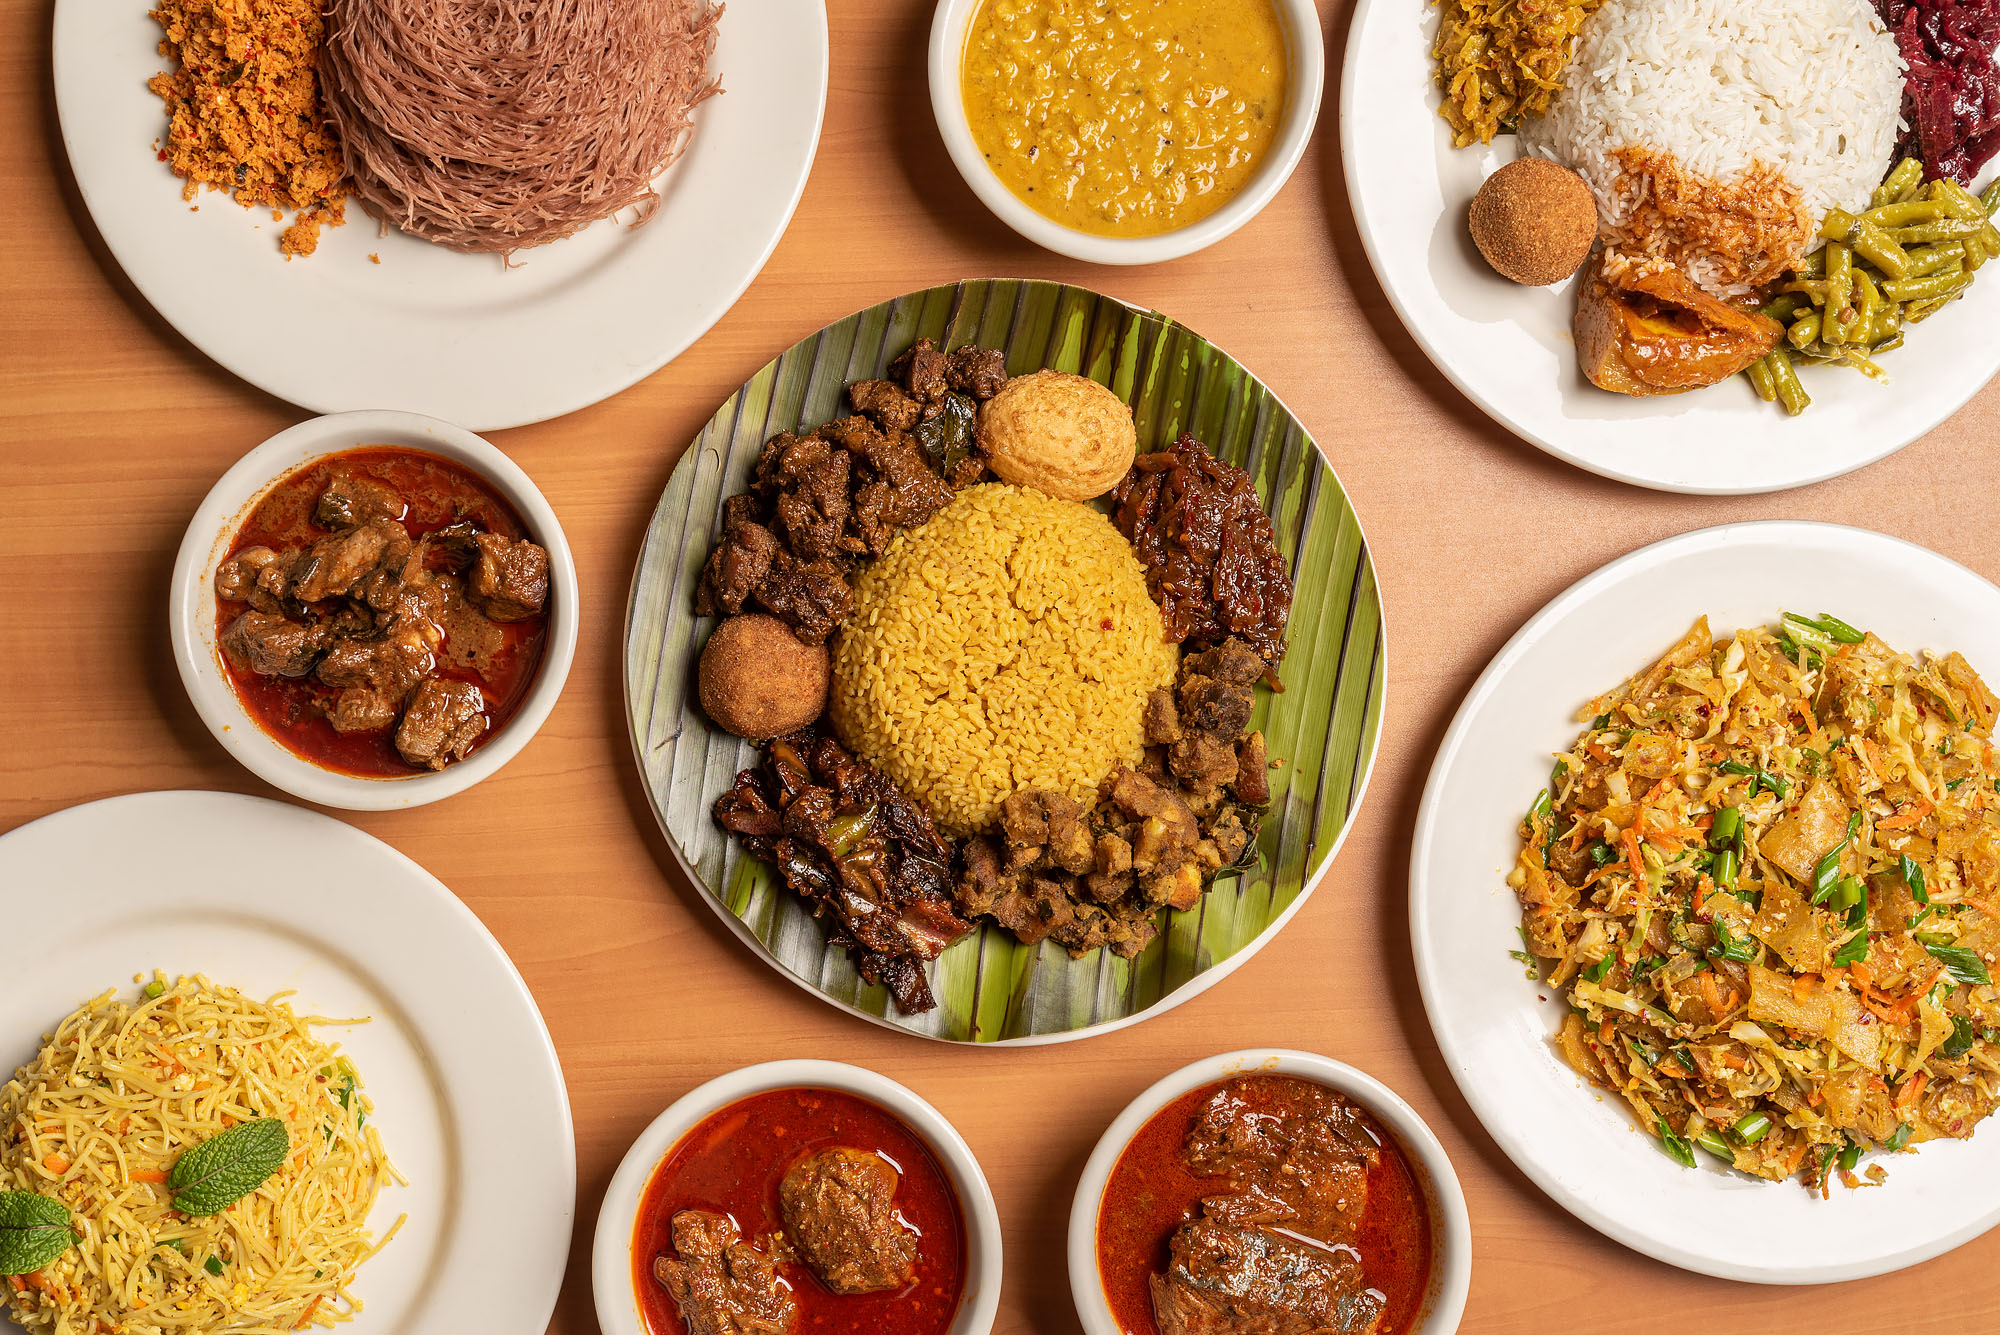 Several Sri Lankan dishes placed on a brown table.